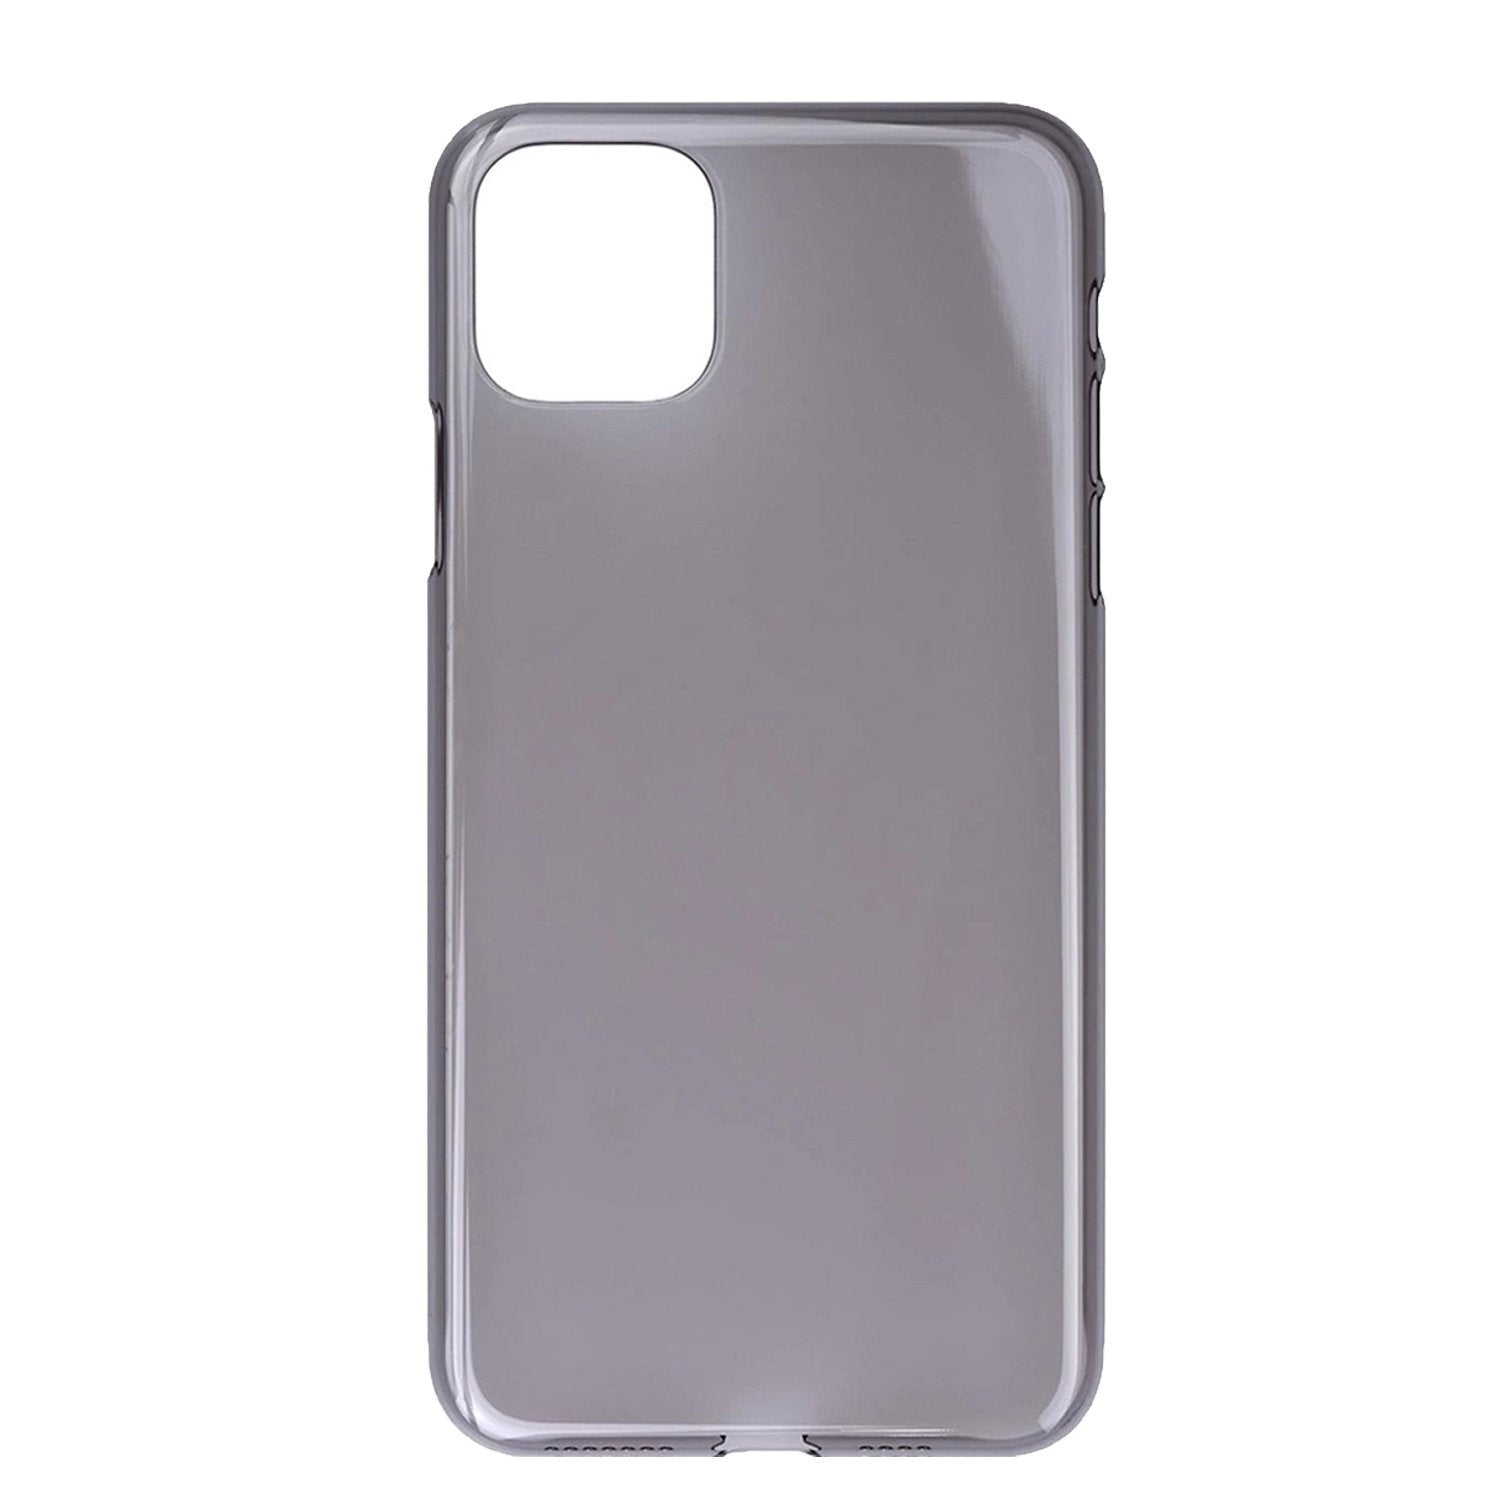 Power Support Air Jacket case for iPhone 12 Pro Max 6.7"(2020), Clear Black Default Power Support 